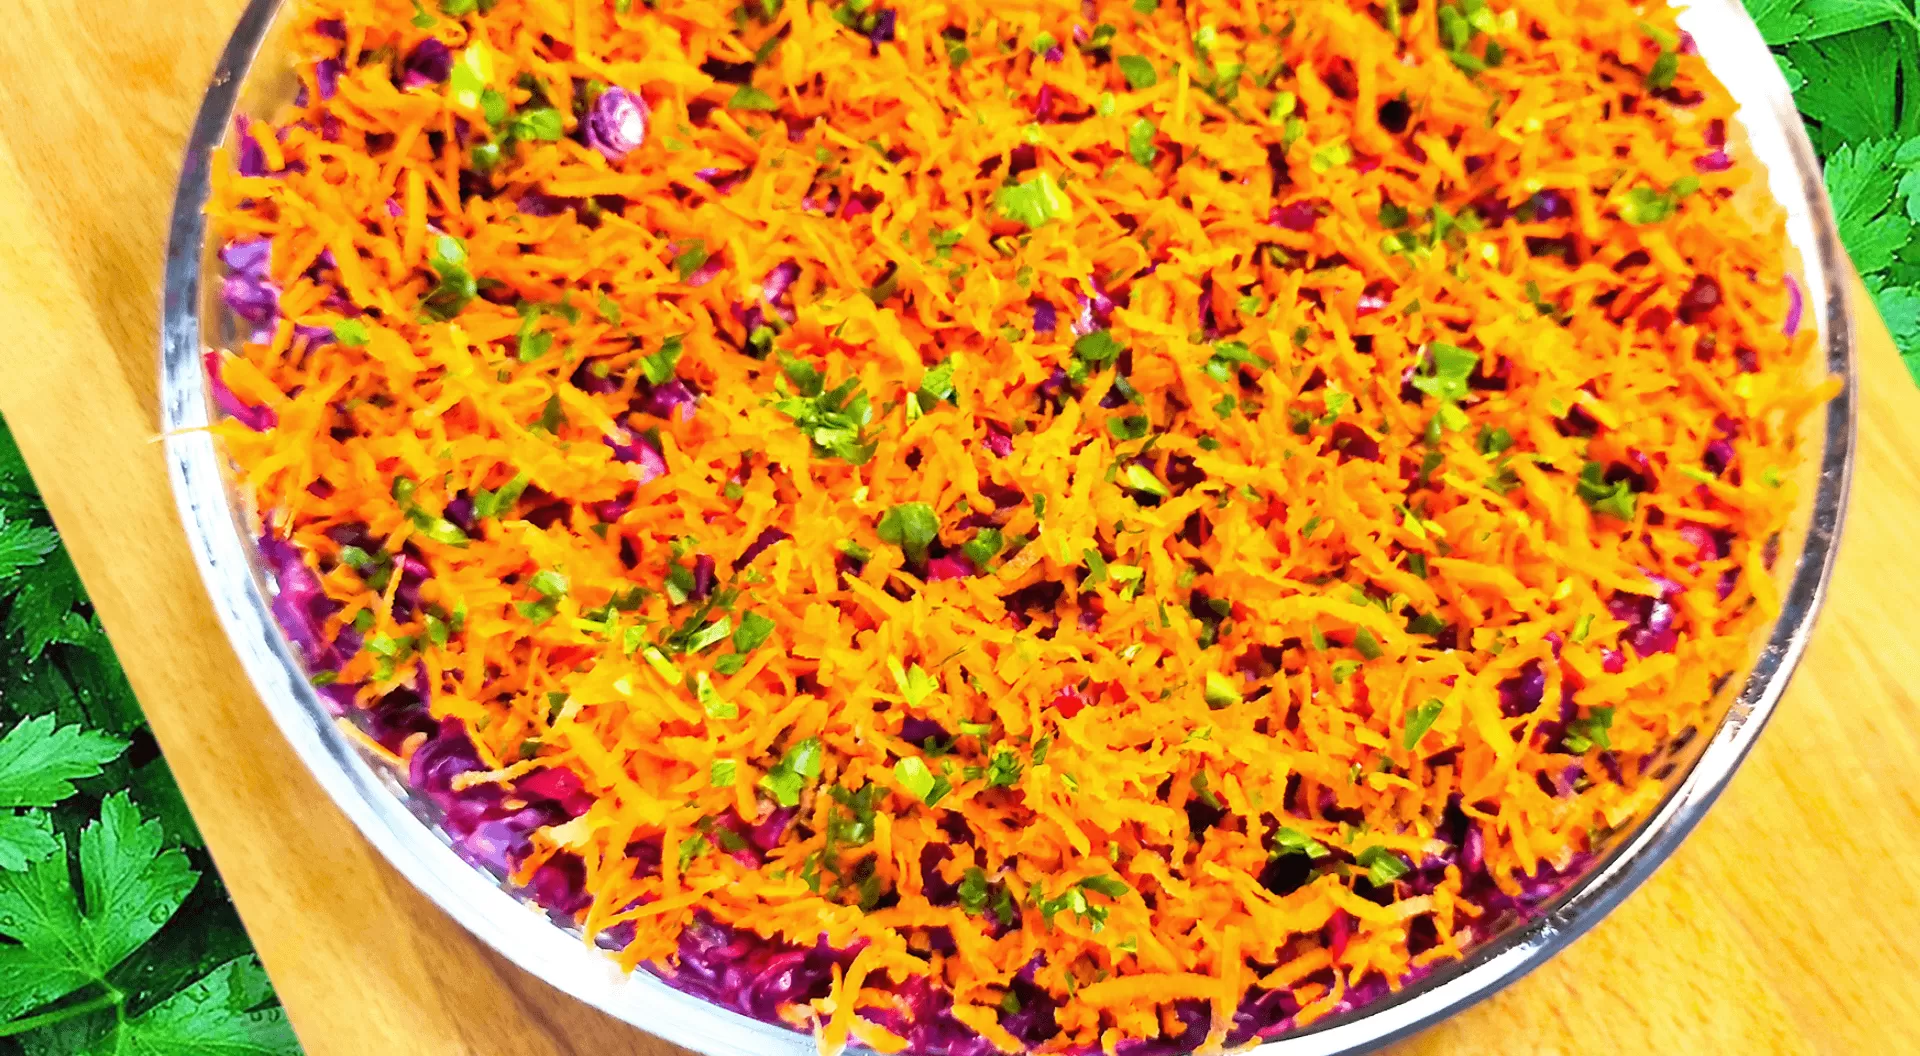 Beet and Red Cabbage Salad Recipe